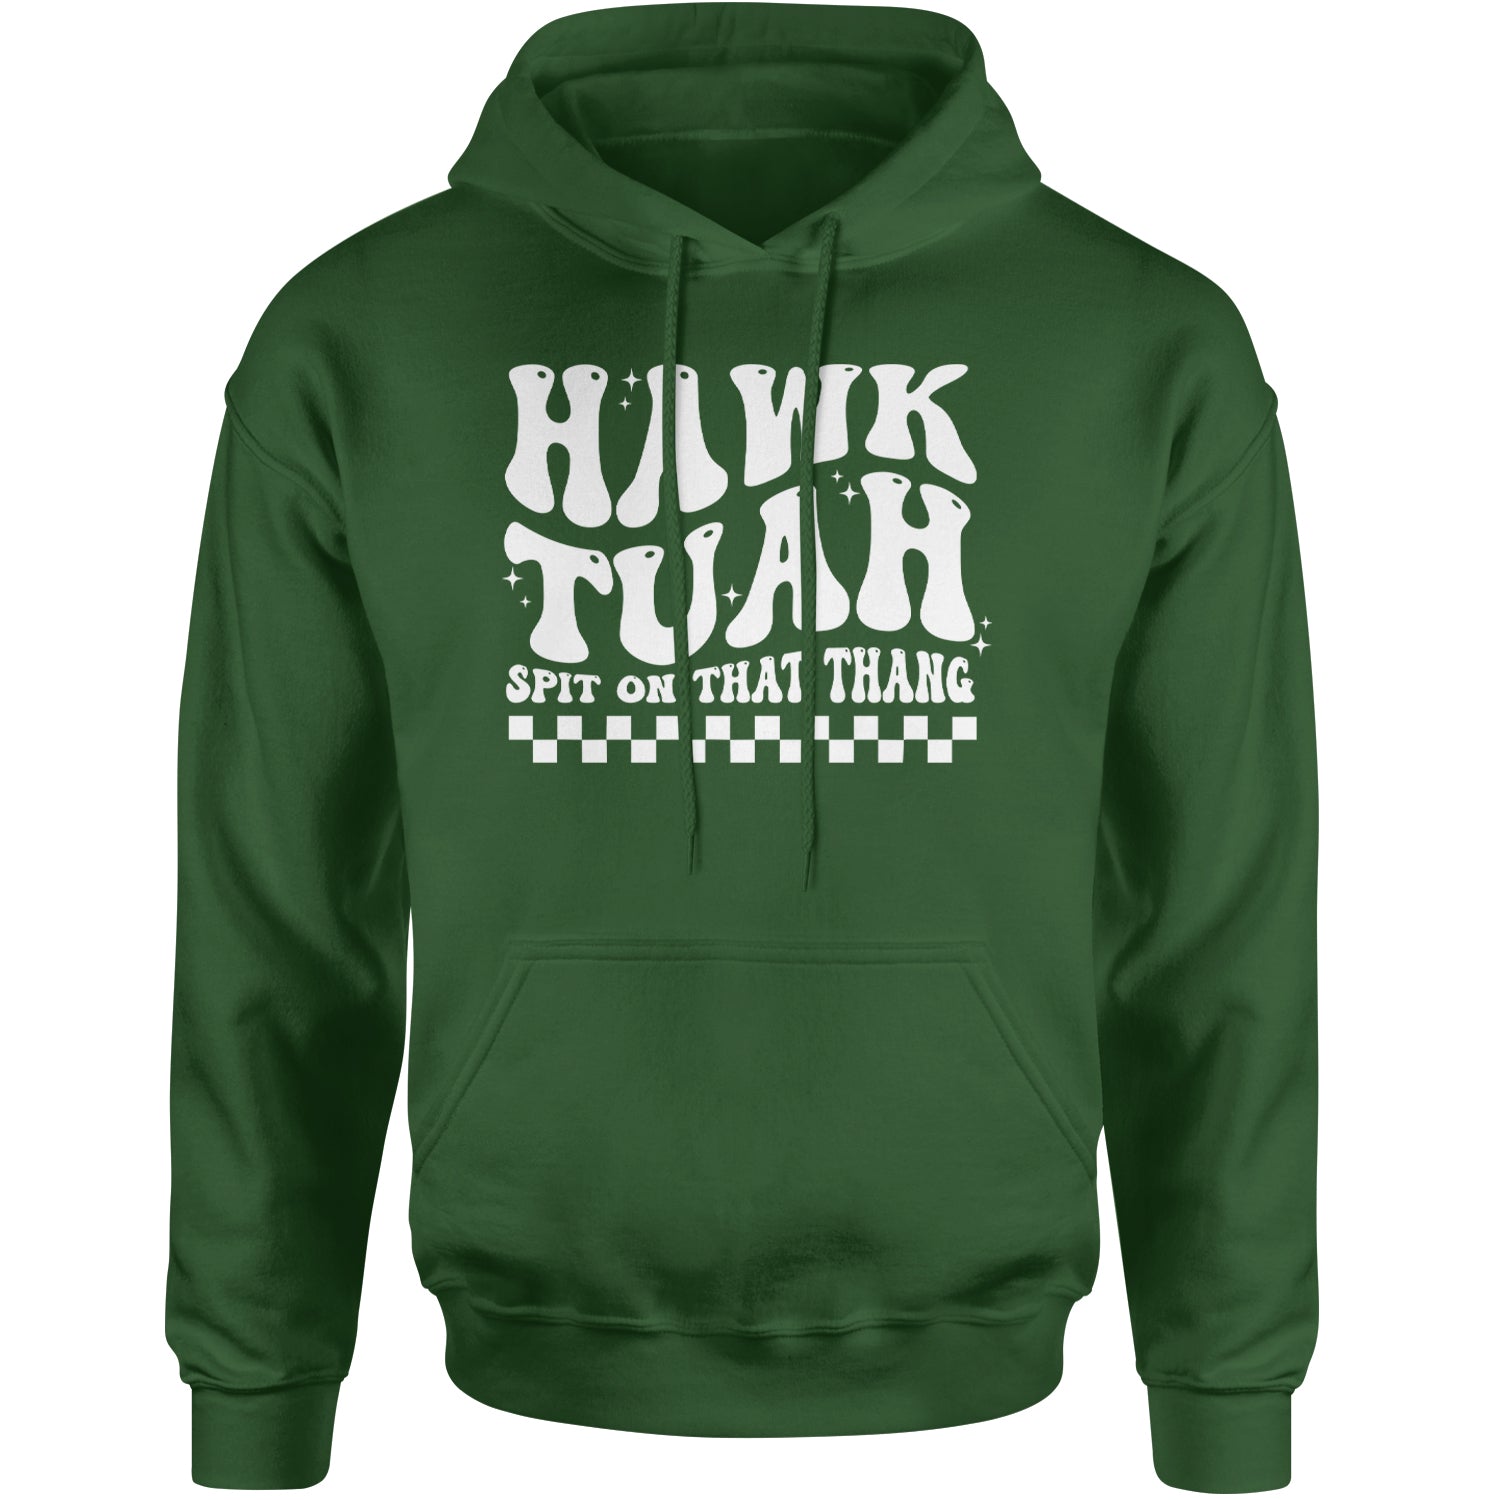 Hawk Tuah Spit On That Thang Adult Hoodie Sweatshirt Forest Green